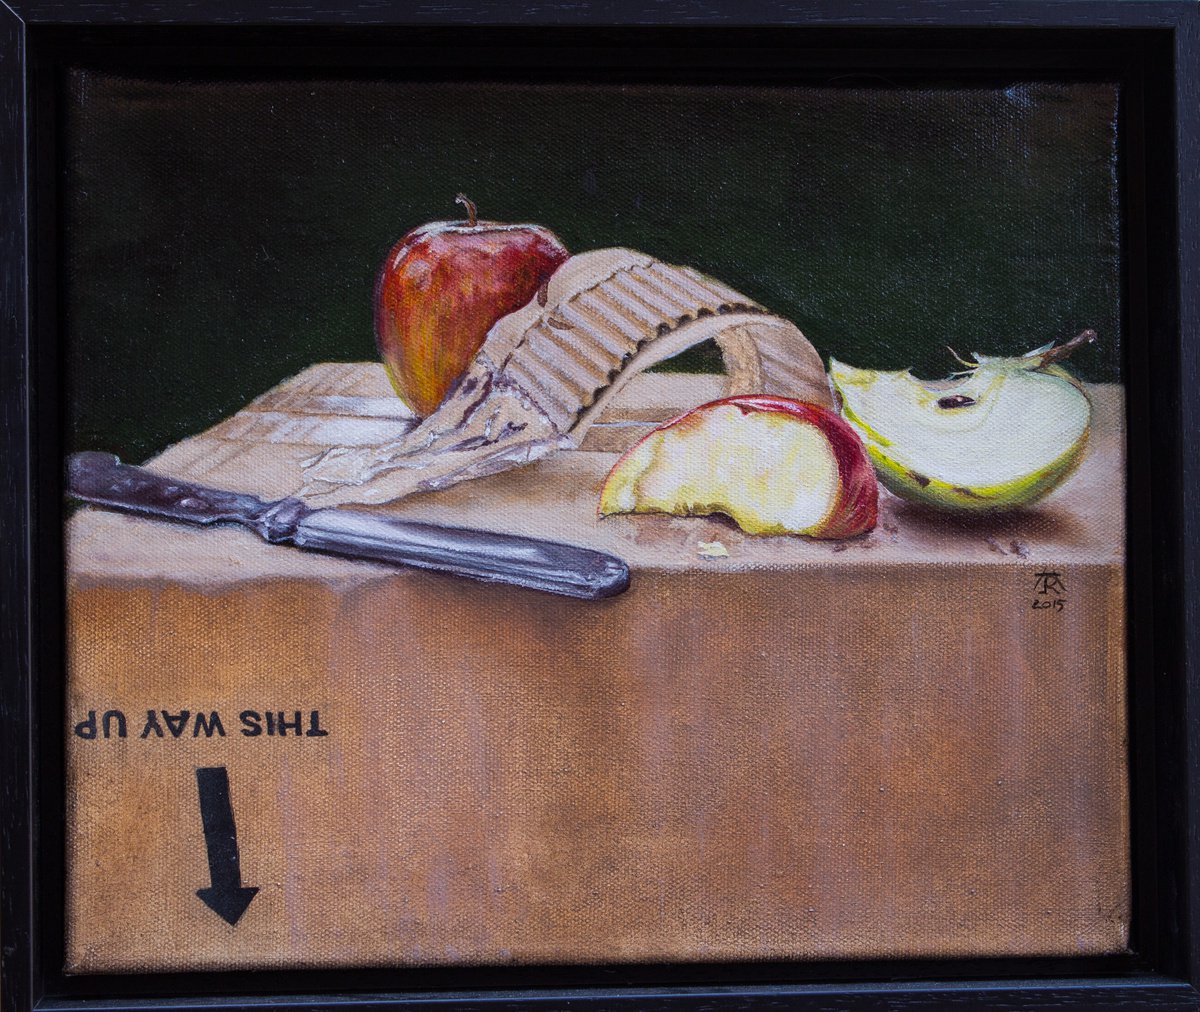 Apples and Knife on Box by Gilly Reeves Hardcastle